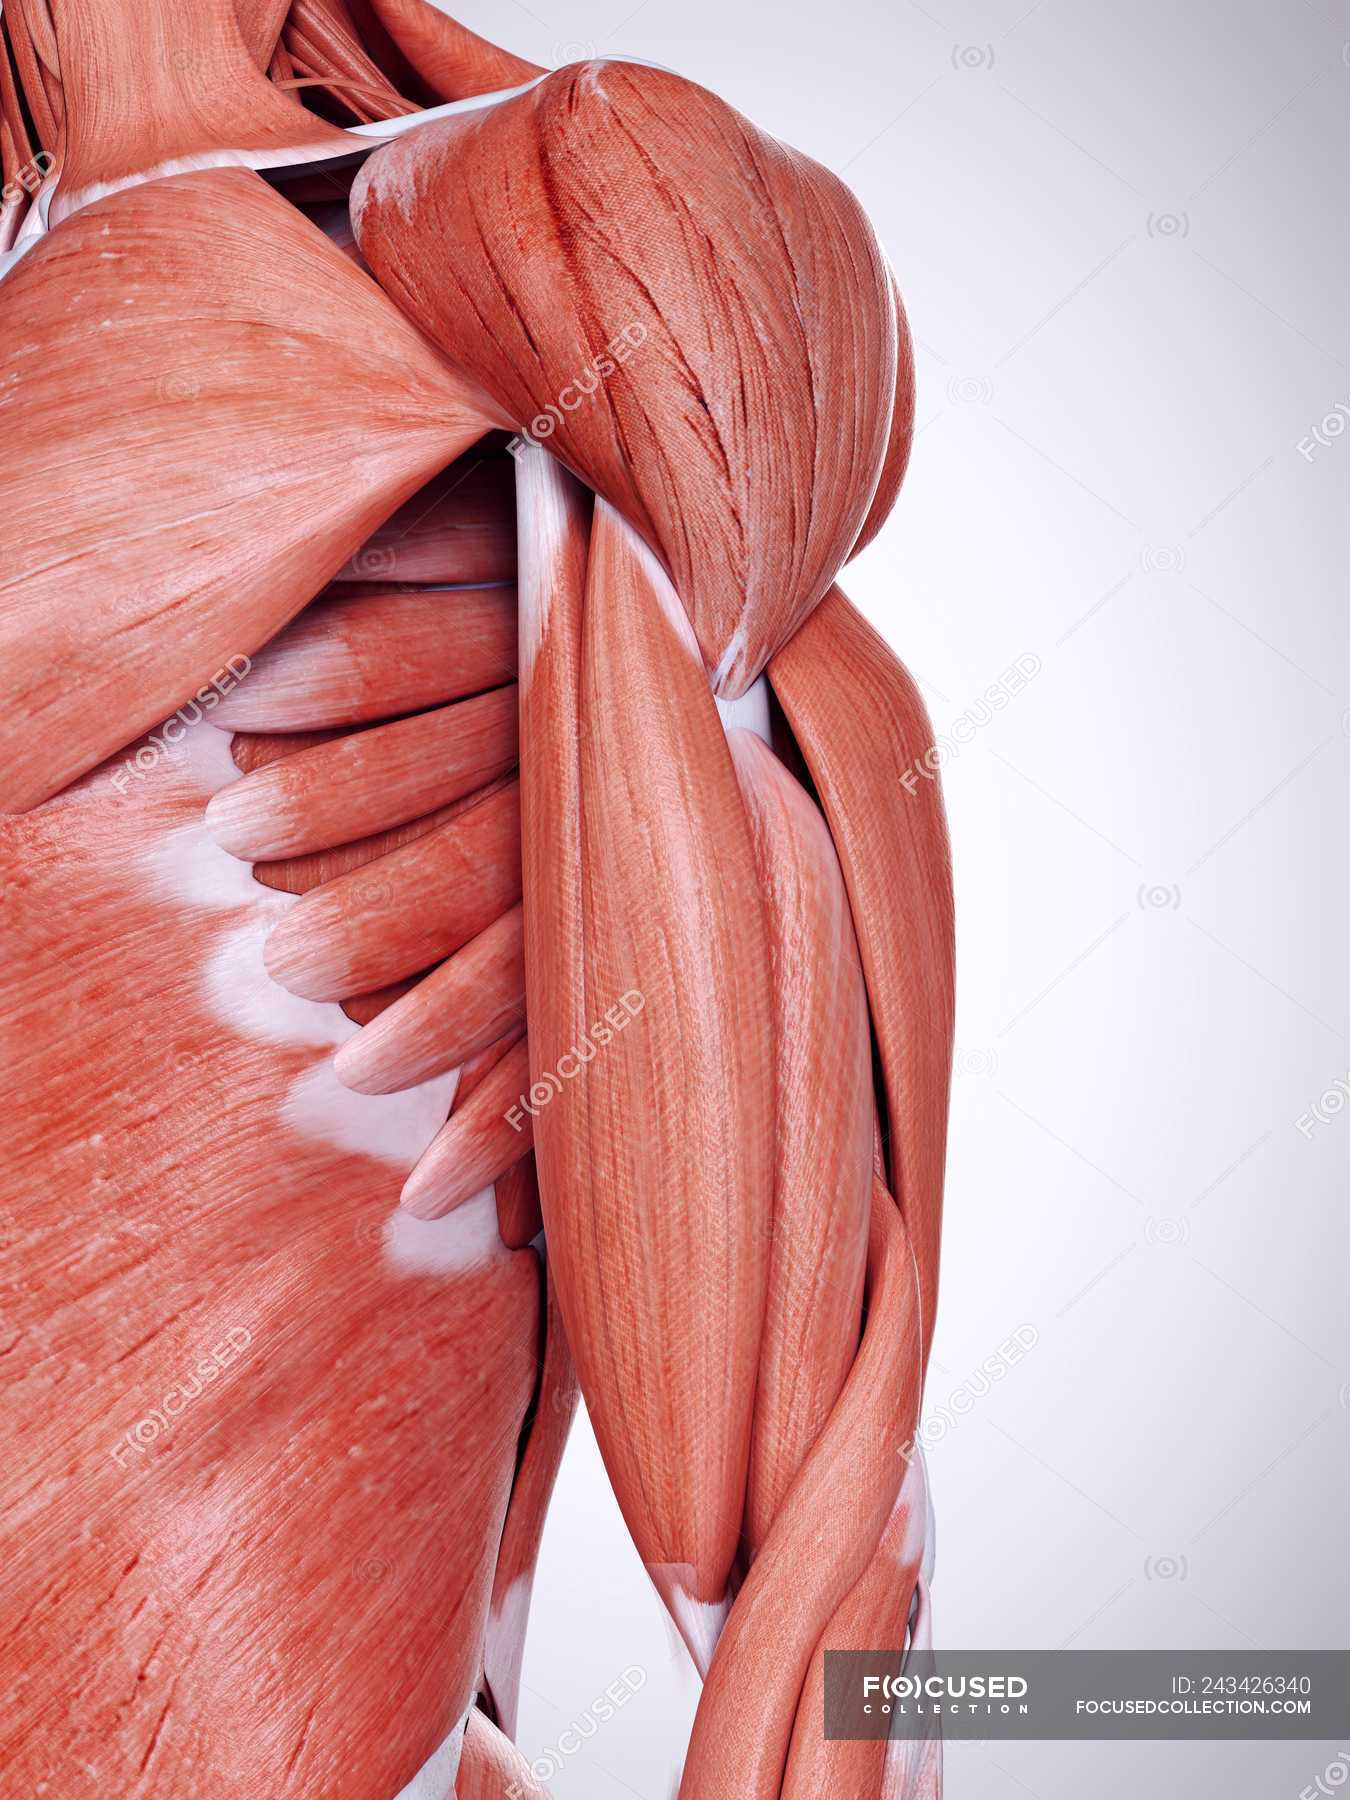 3d rendered illustration of upper arm muscles in human body. — plain